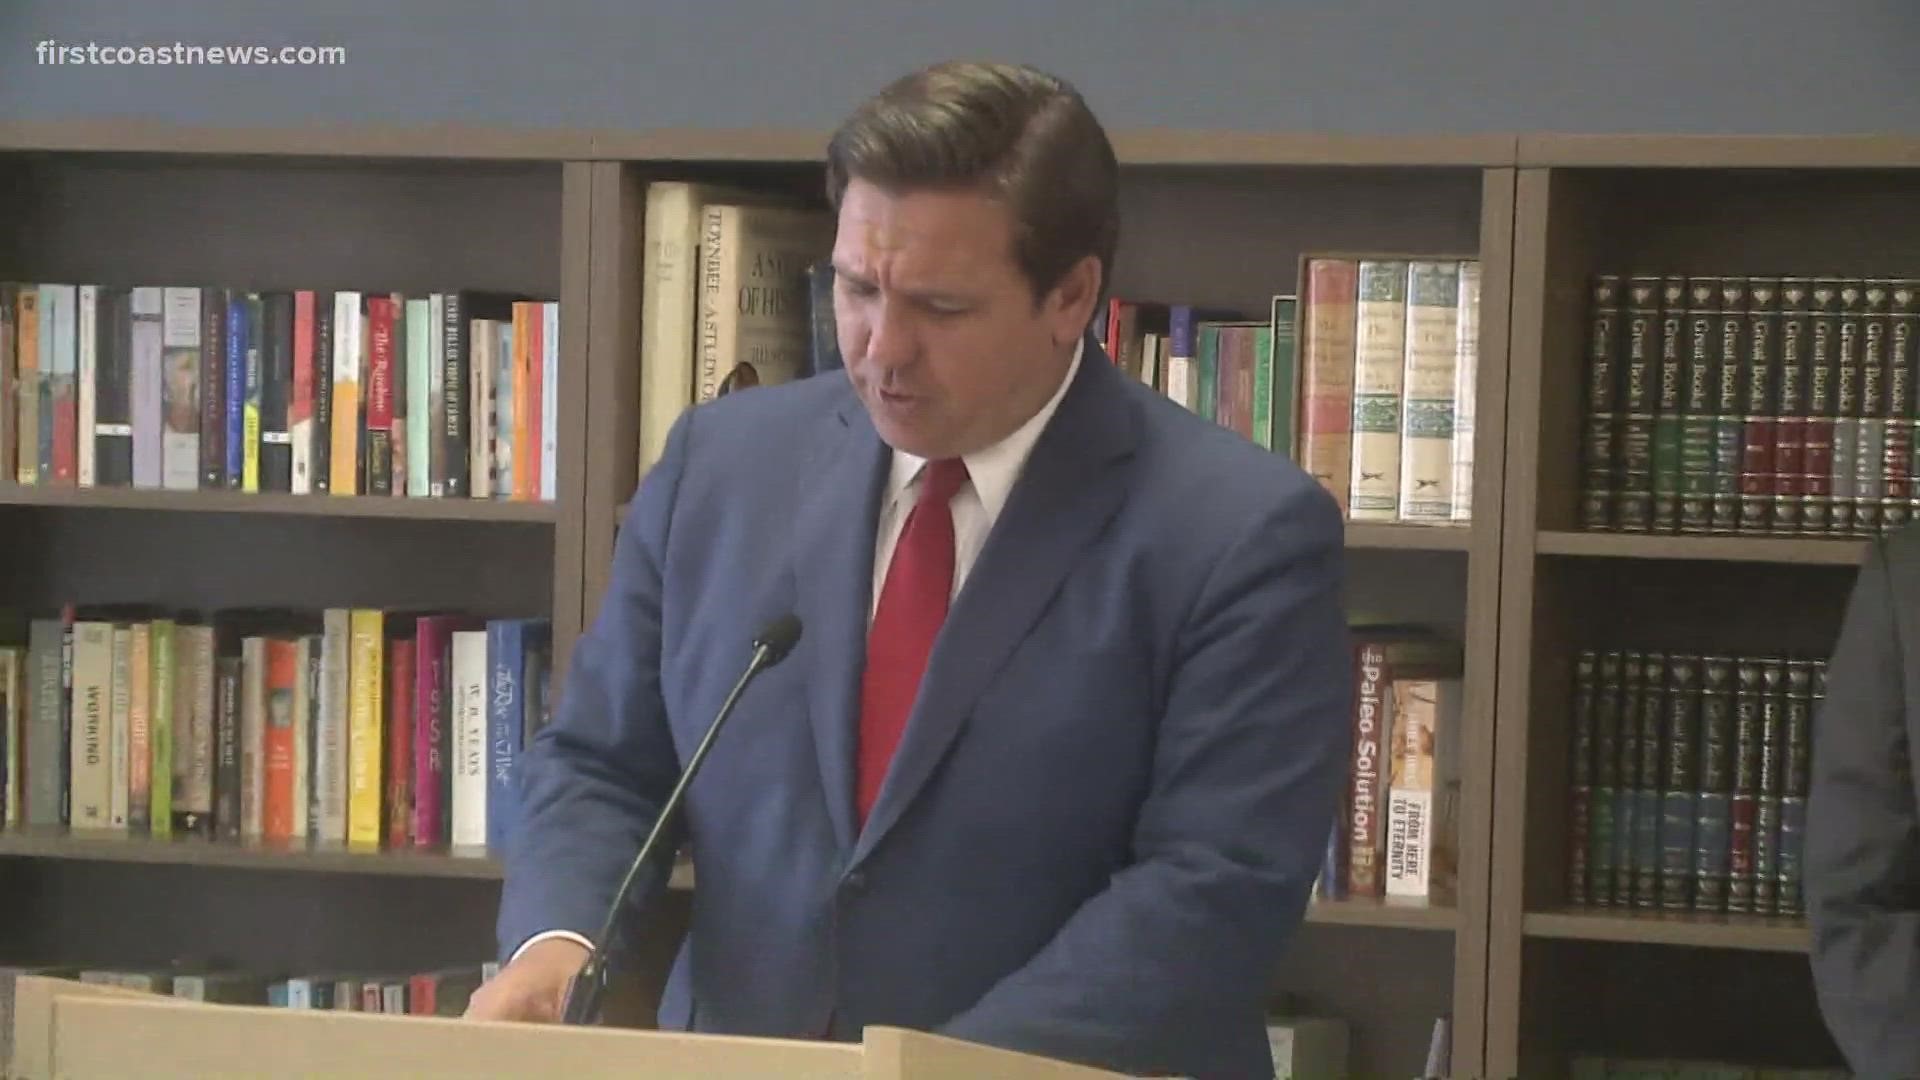 DeSantis largely touted Florida schools' reopening, saying that the push for schools to offer in-person classes outweighed the mental health detriments.